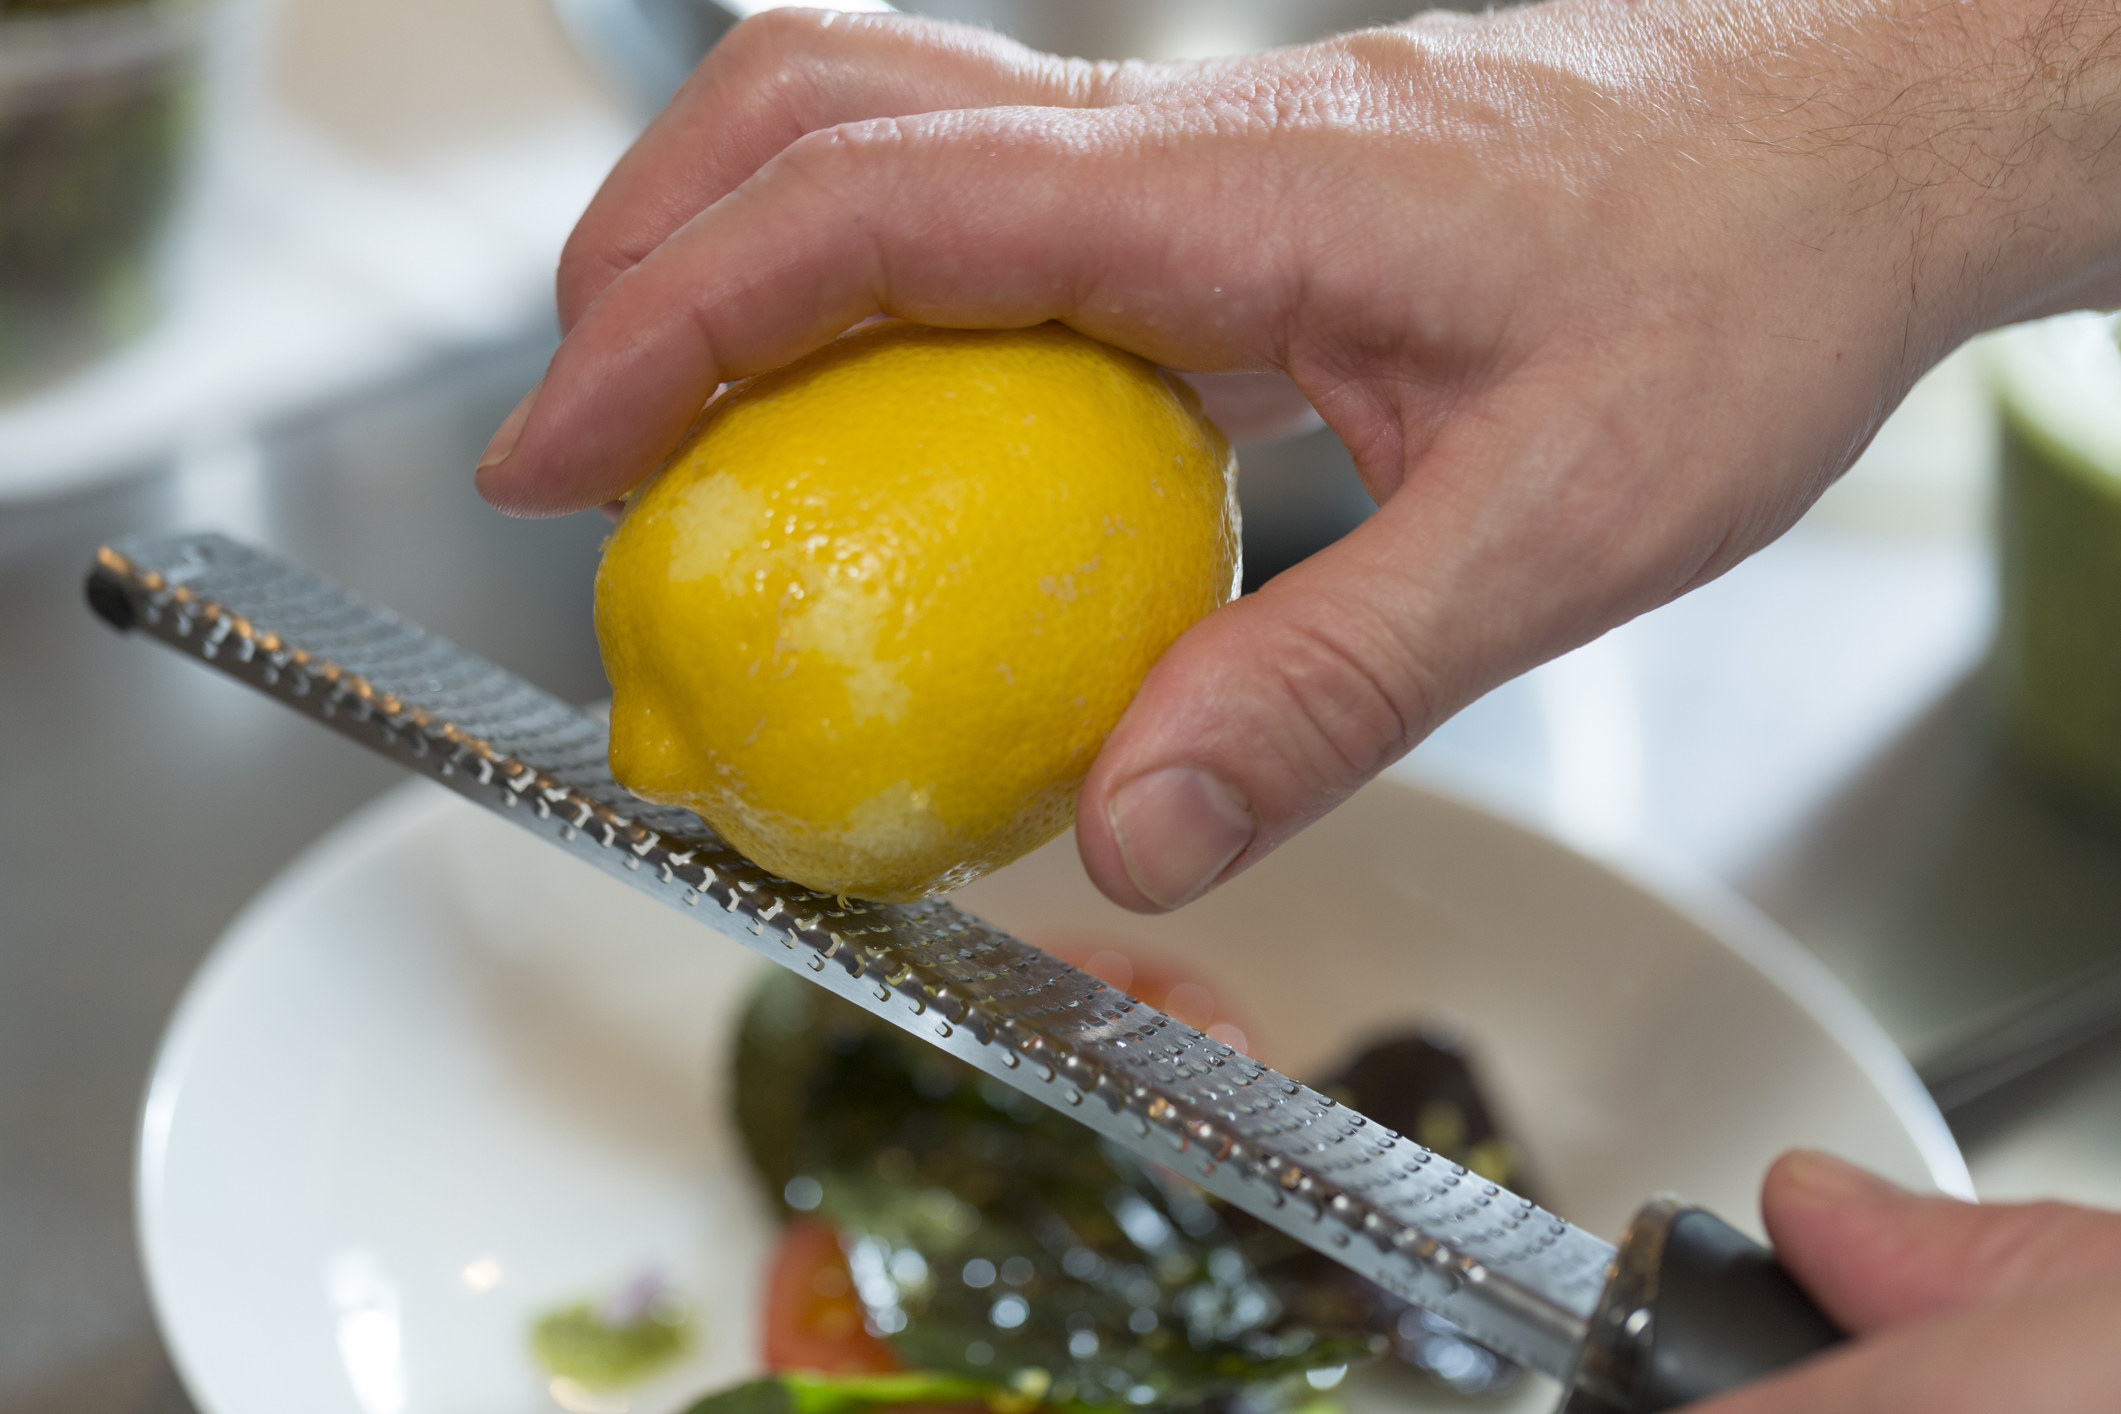 Cook Zesting the peel of a lemon on a microplane grater.